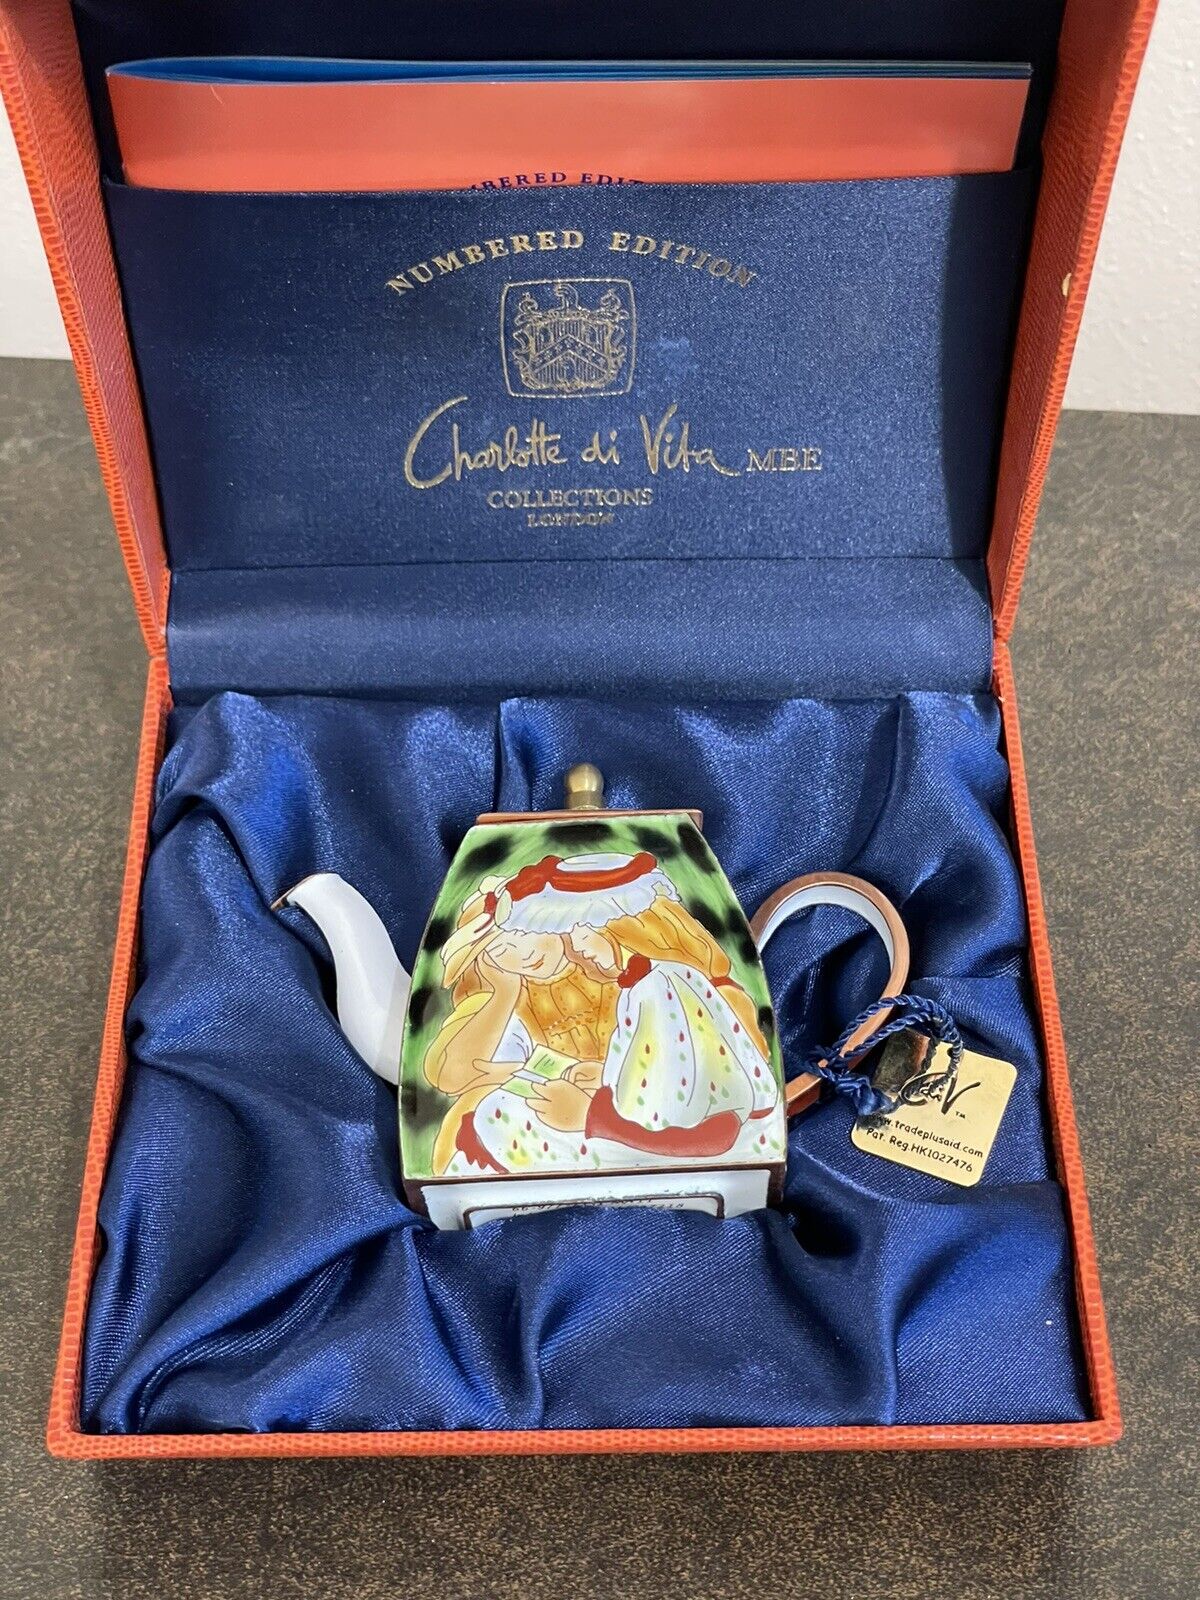 Charlotte De Vita Numbered Edition two sisters 66-977-71-1 MA11 Teapot